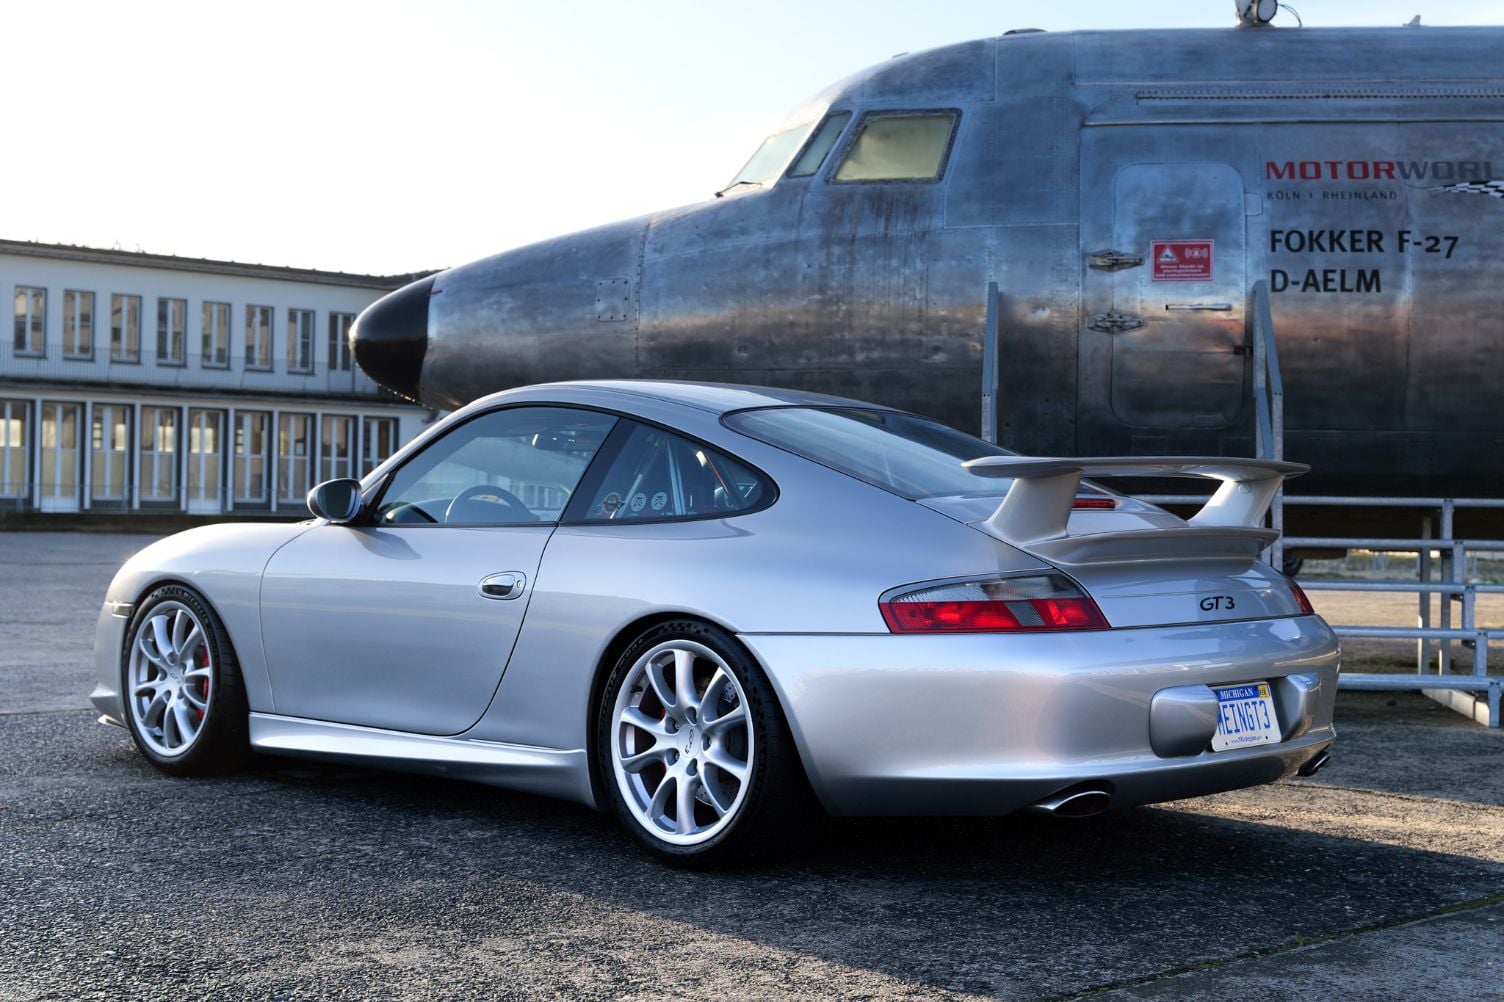 2004 Porsche GT3 - 2004 996 GT3 - Used - VIN WPOAC299X4S692349 - 16,000 Miles - 6 cyl - 2WD - Manual - Coupe - Silver - Pulheim, Germany